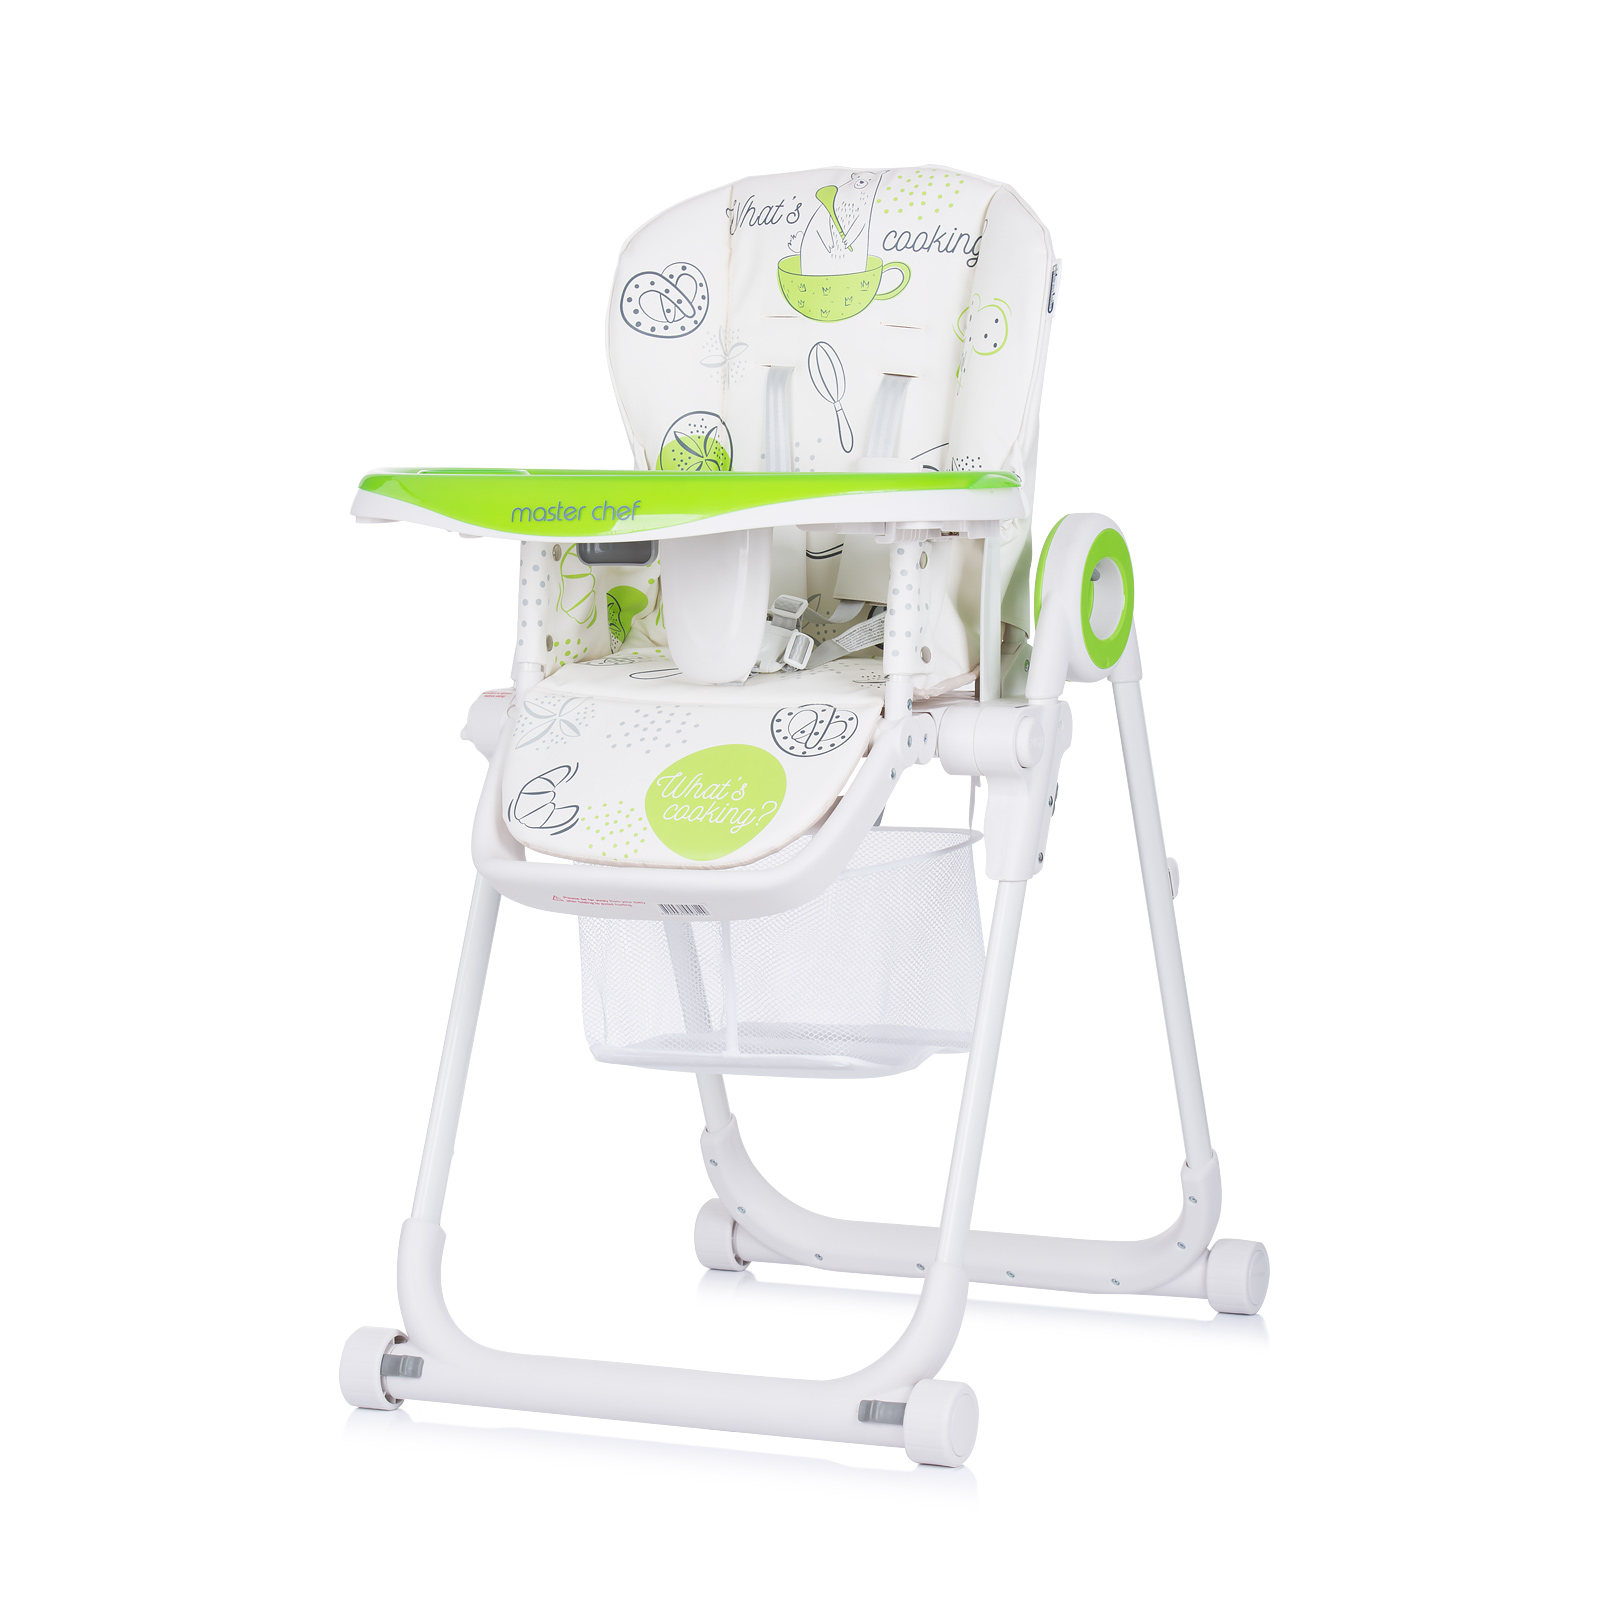 High chair “Master Chef” – Lime